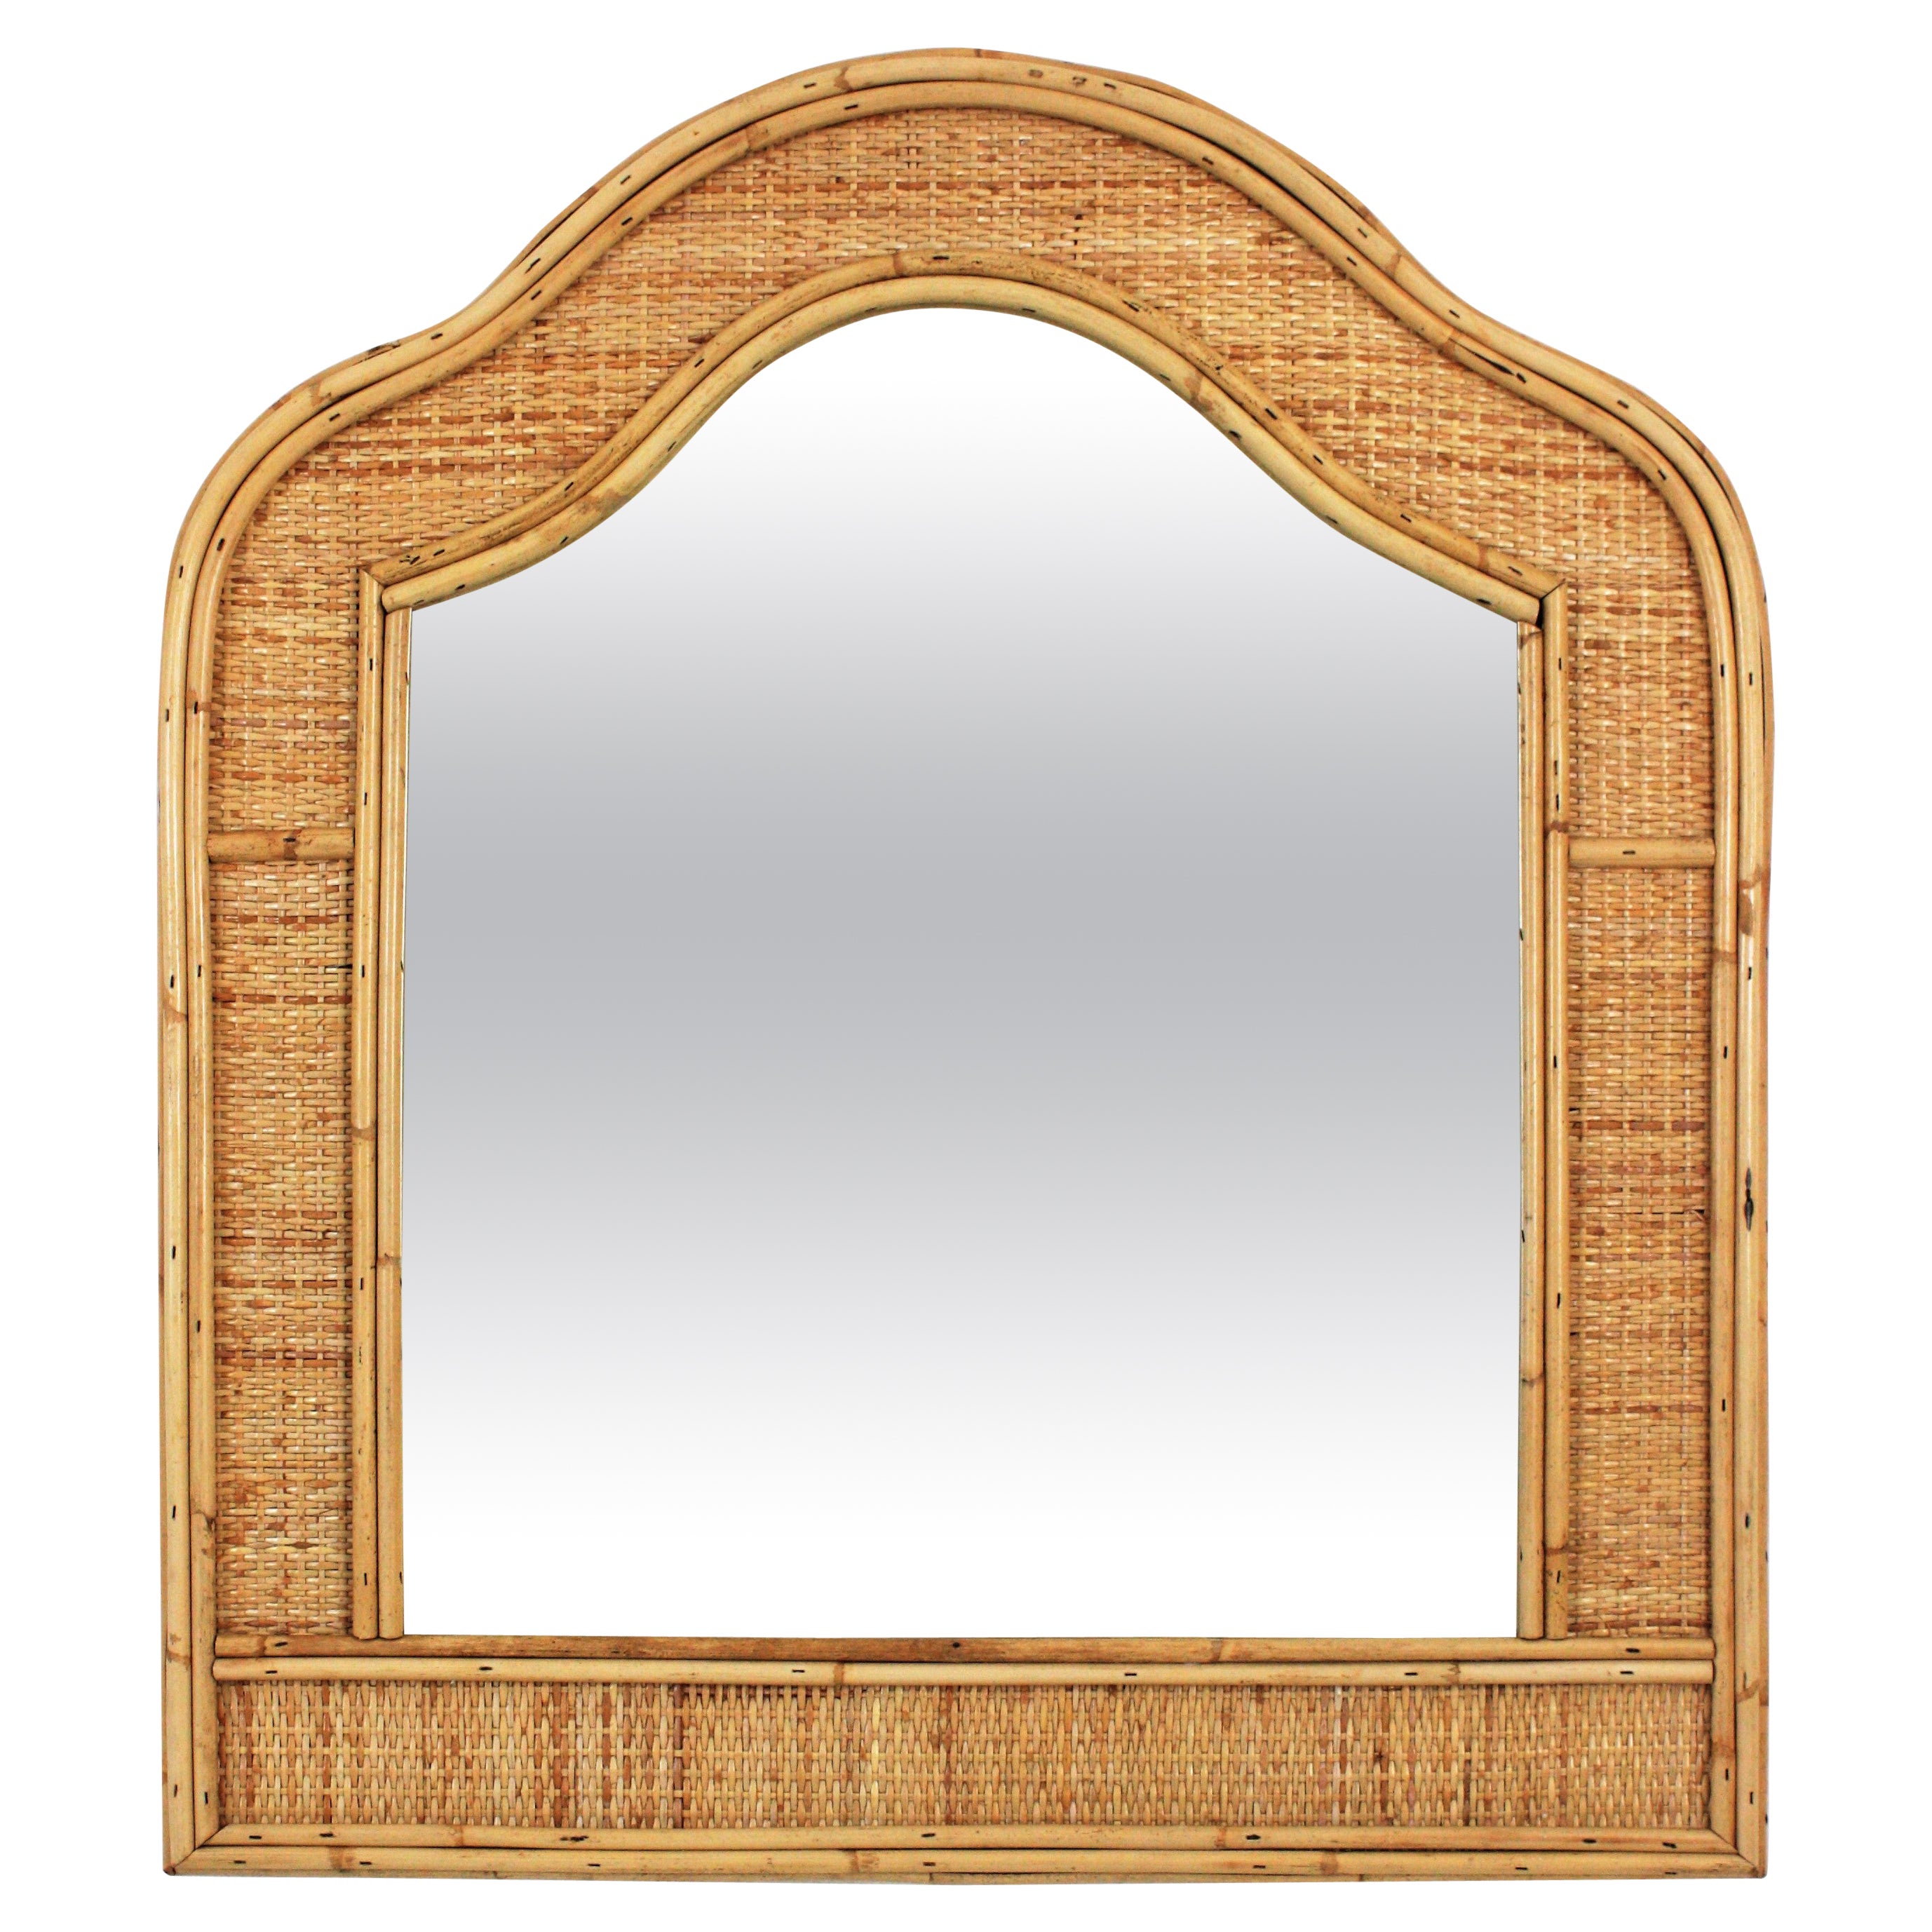 French Coastal Arched Mirror in Rattan and Woven Wicker